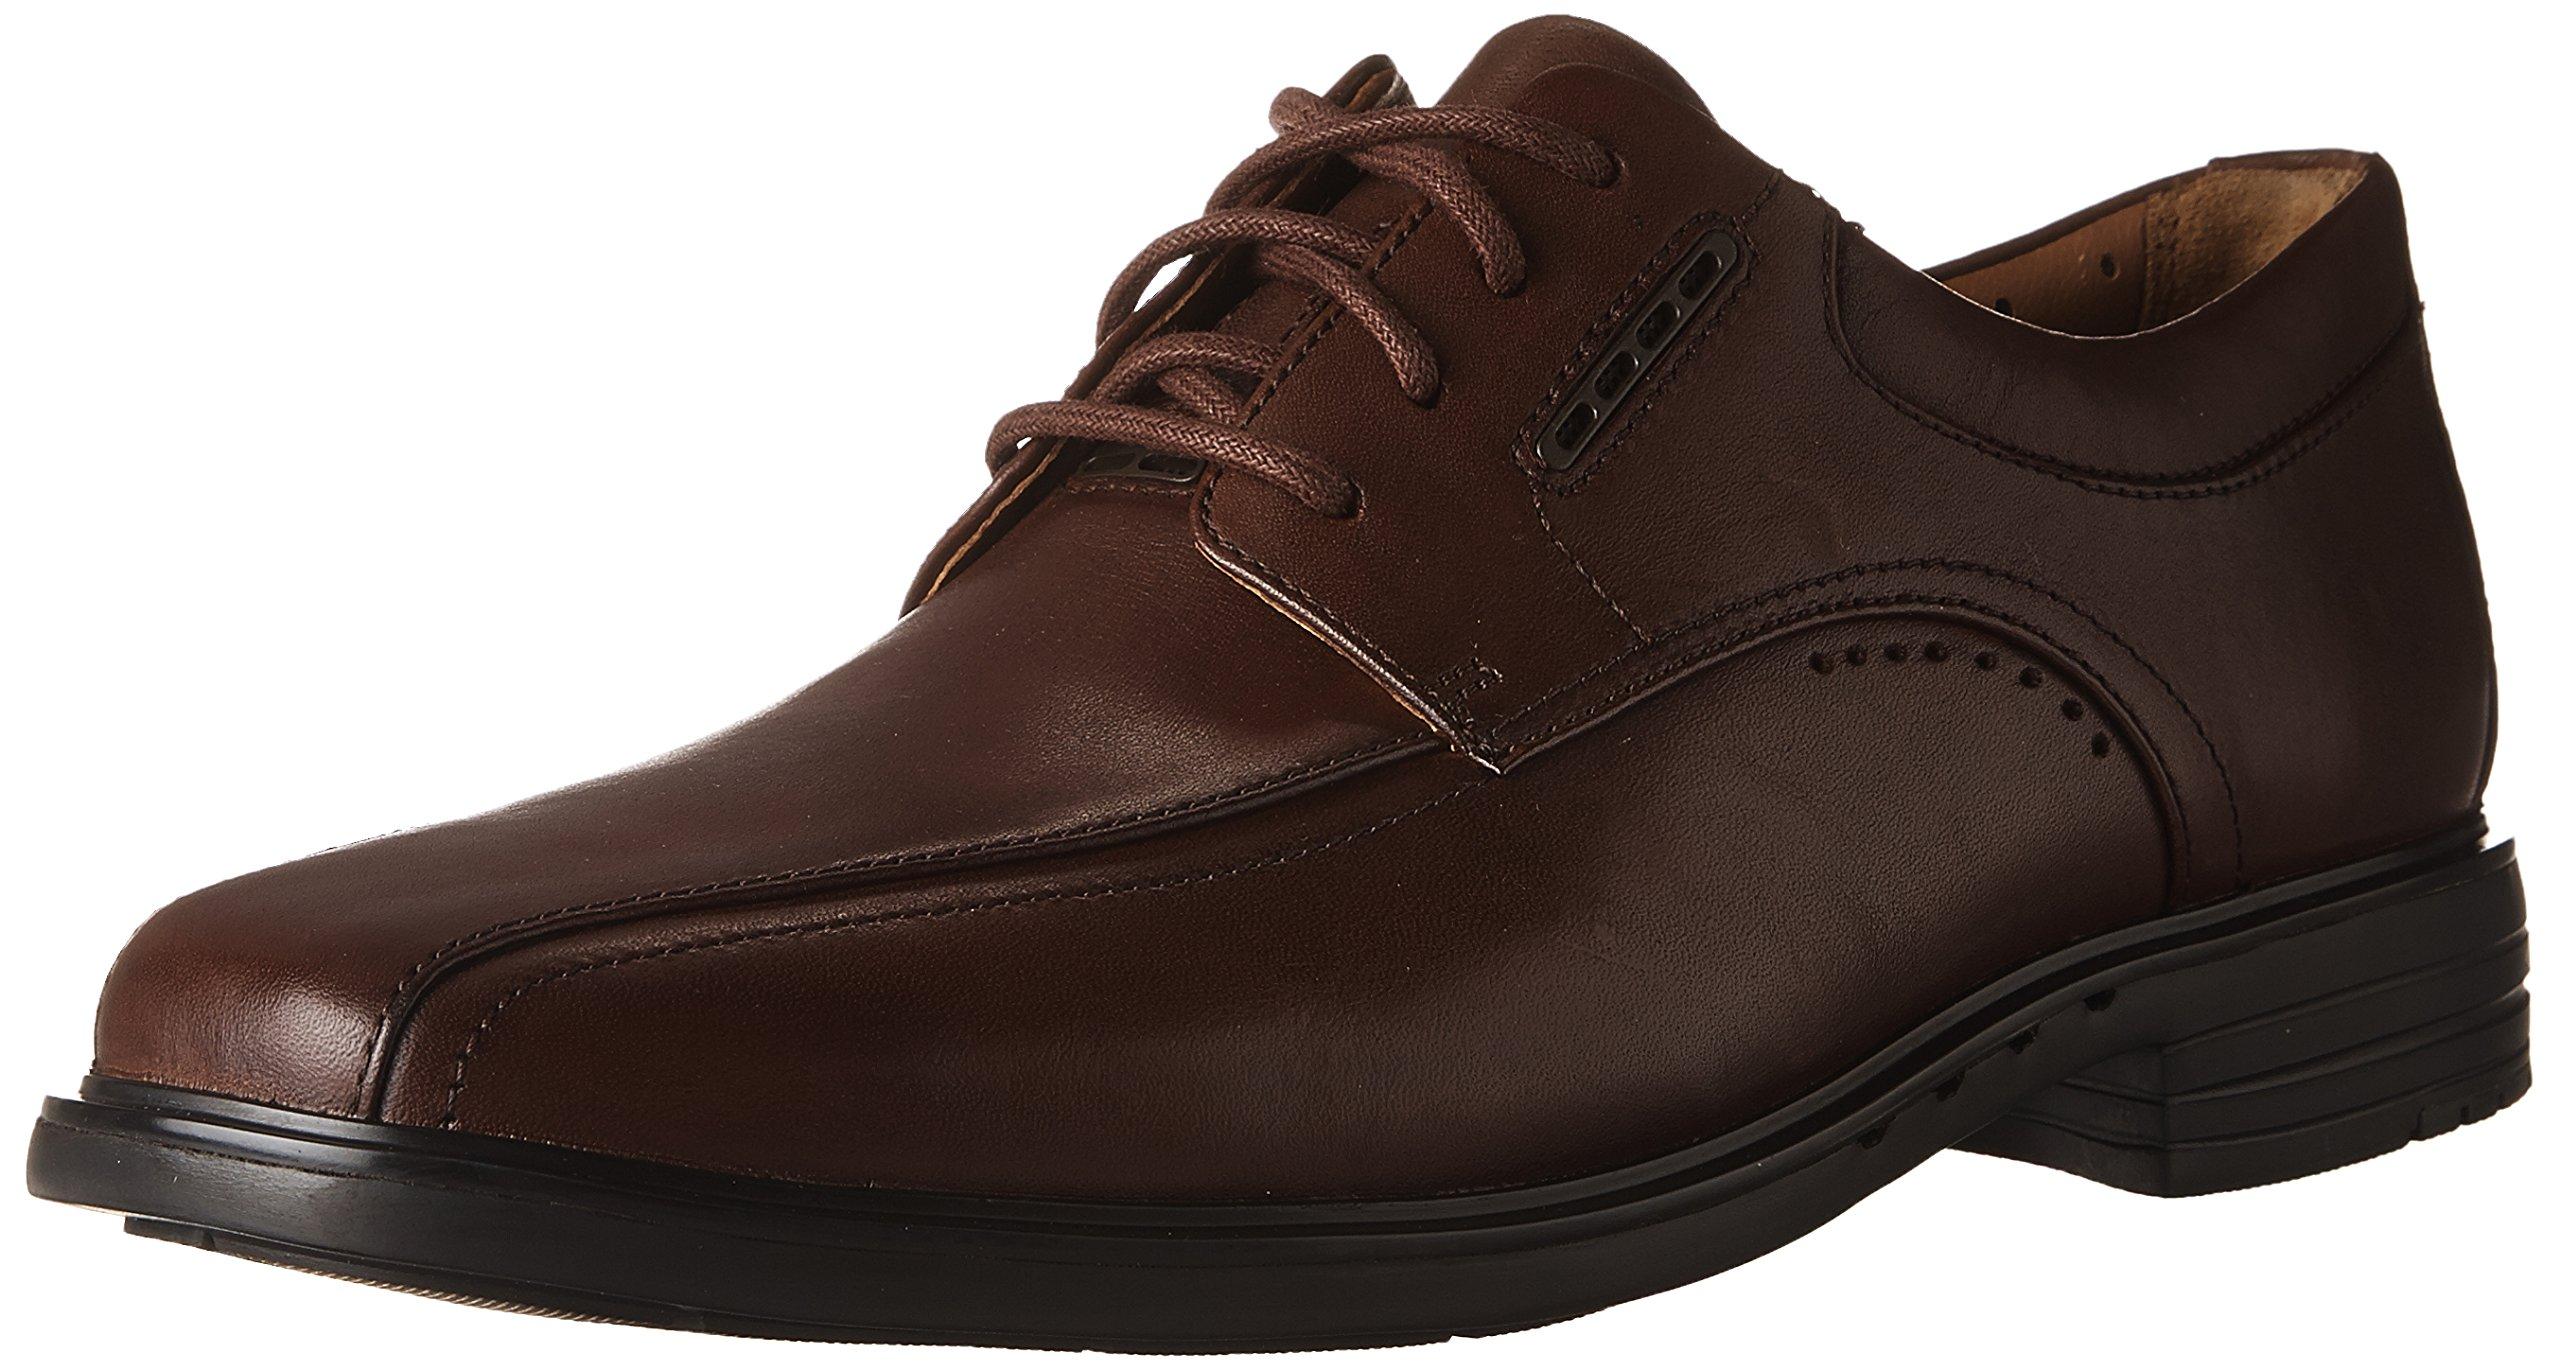 Clarks Leather Unkenneth Way Oxford in Brown Leather (Brown) for Men - Save  57% - Lyst